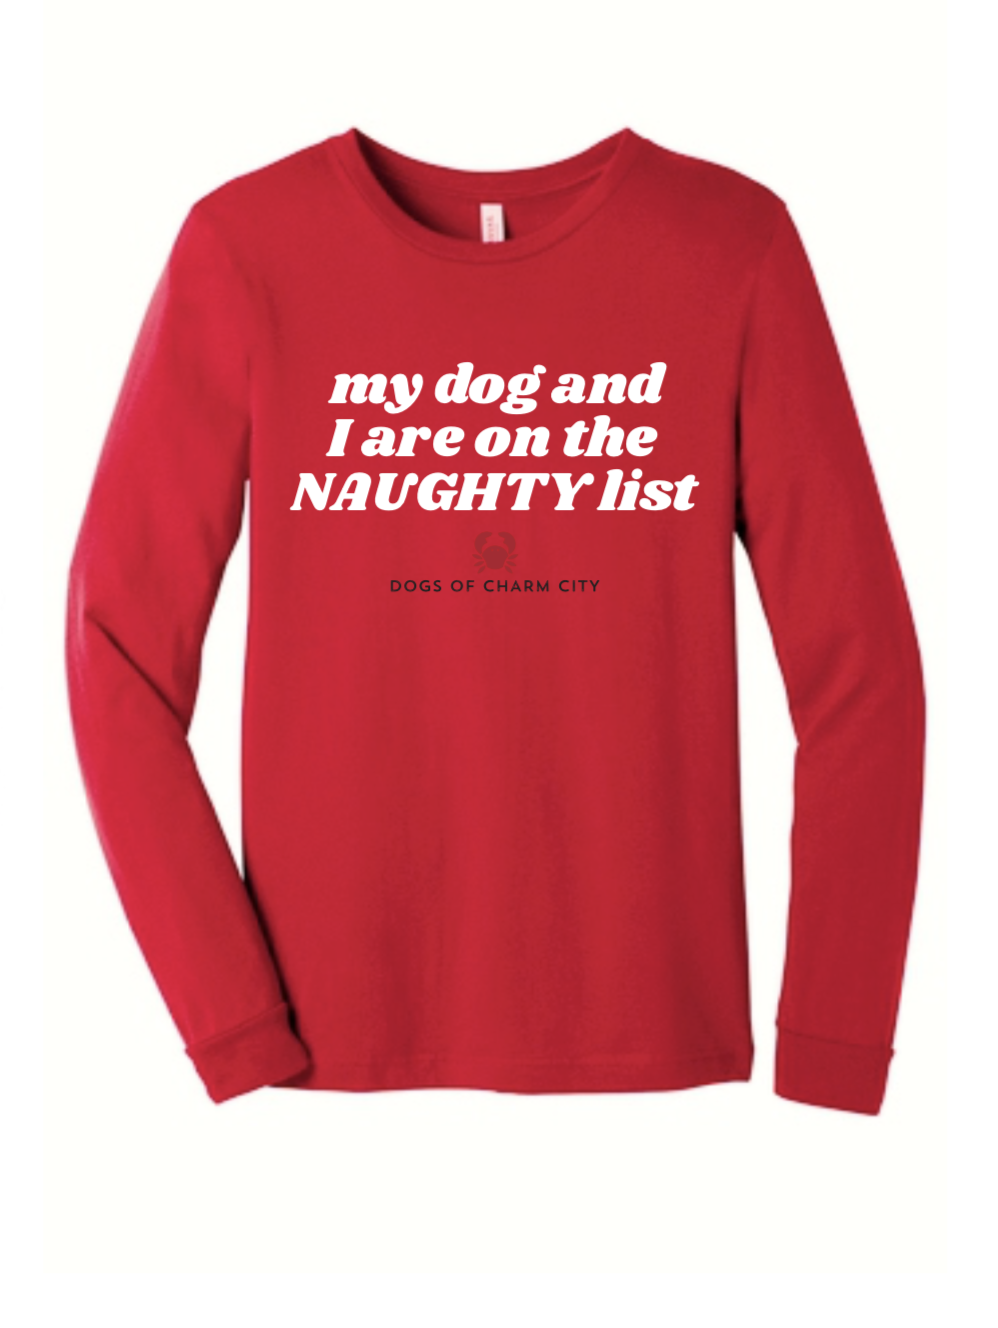 My dog and I are on the NAUGHTY list Long Sleeve Tee